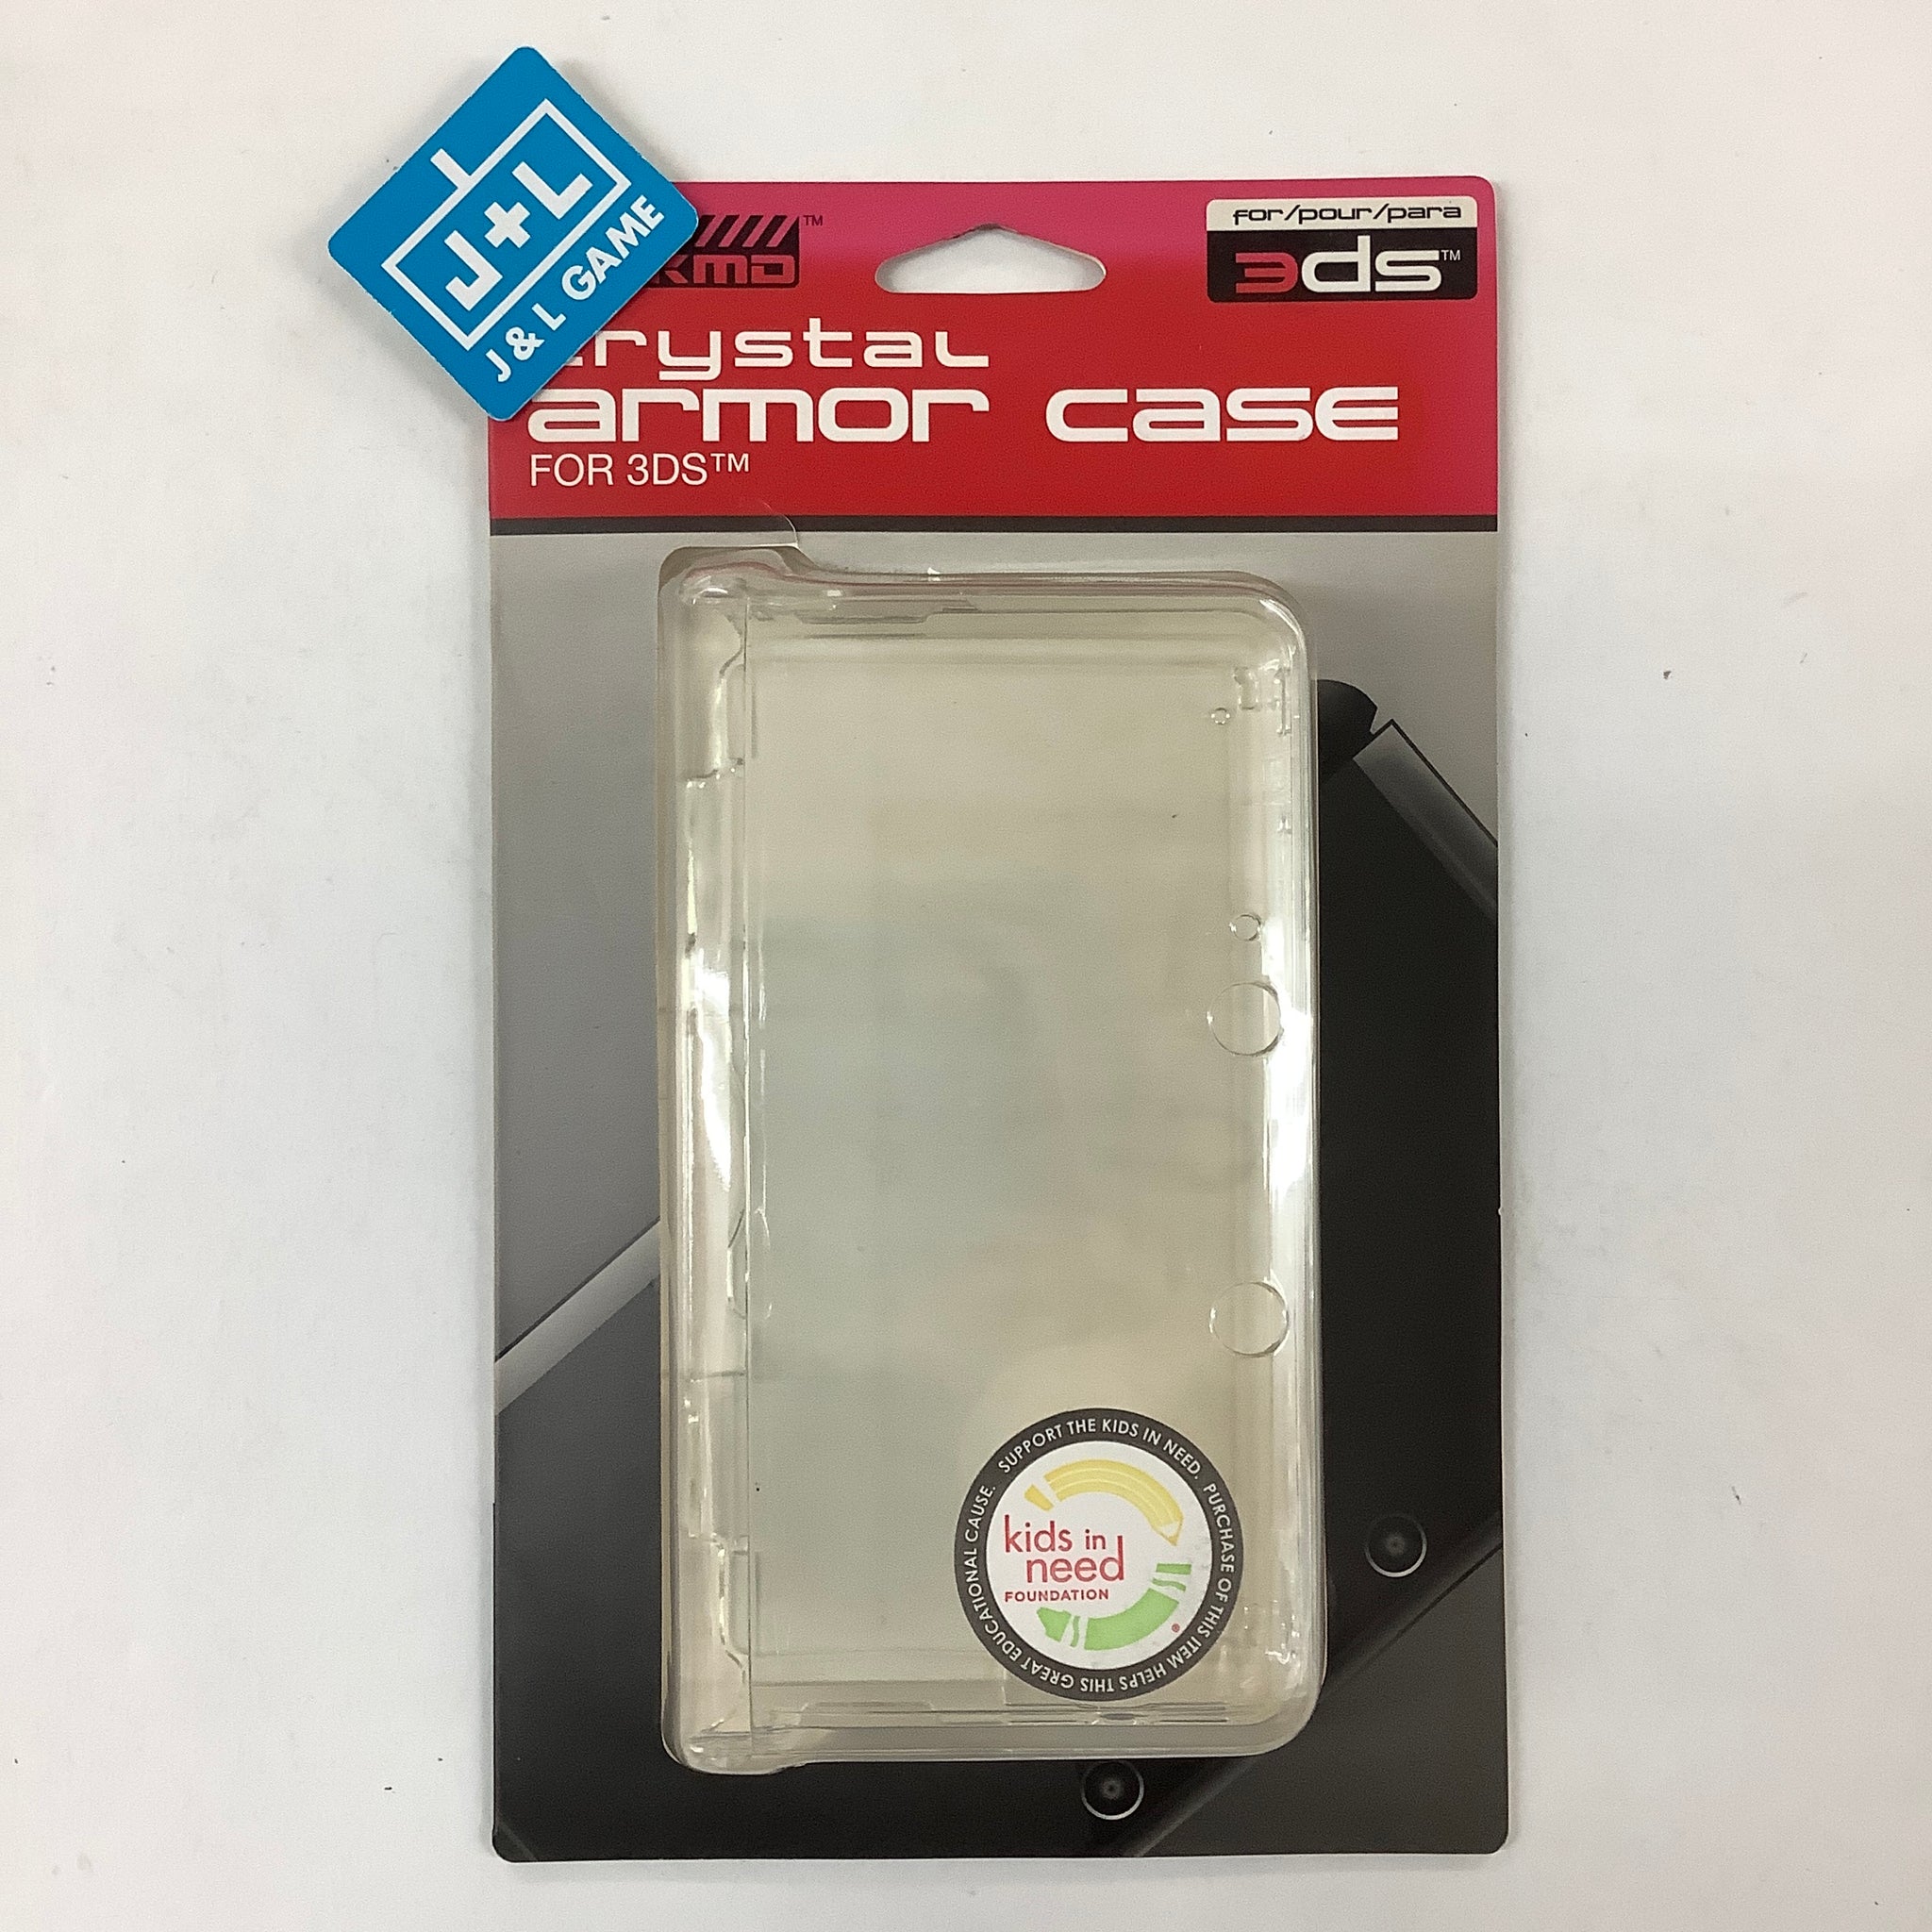 KMD Crystal Armor Case for 3DS - Nintendo 3DS ACCESSORIES KMD   